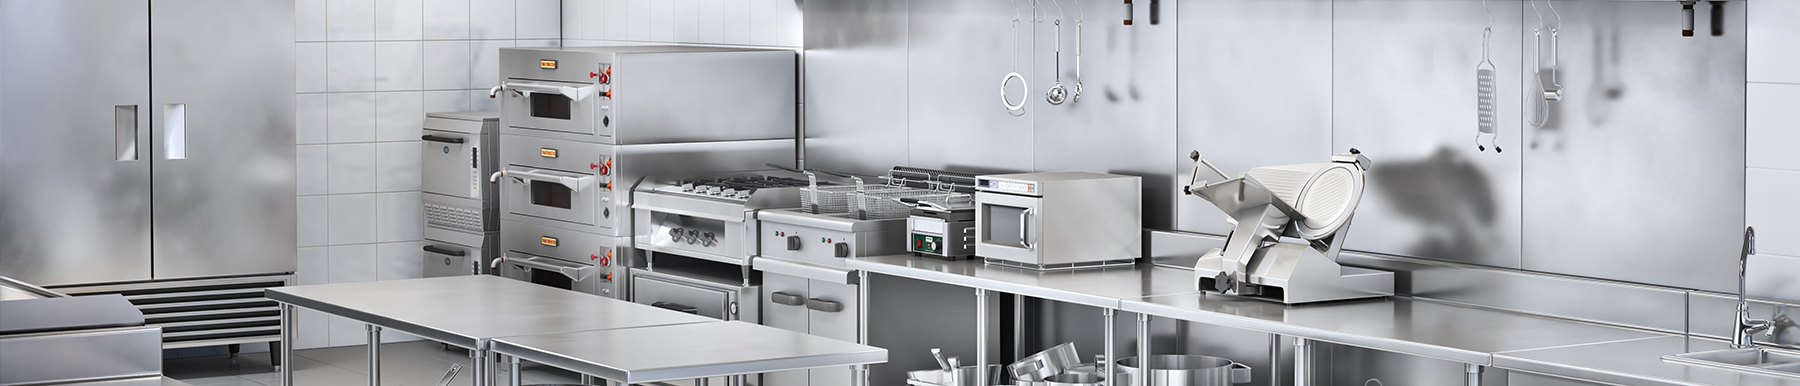 Catering Equipment Suppliers Near Nuneaton & Bedworth | H2 Catering Equipment Catering Equipment